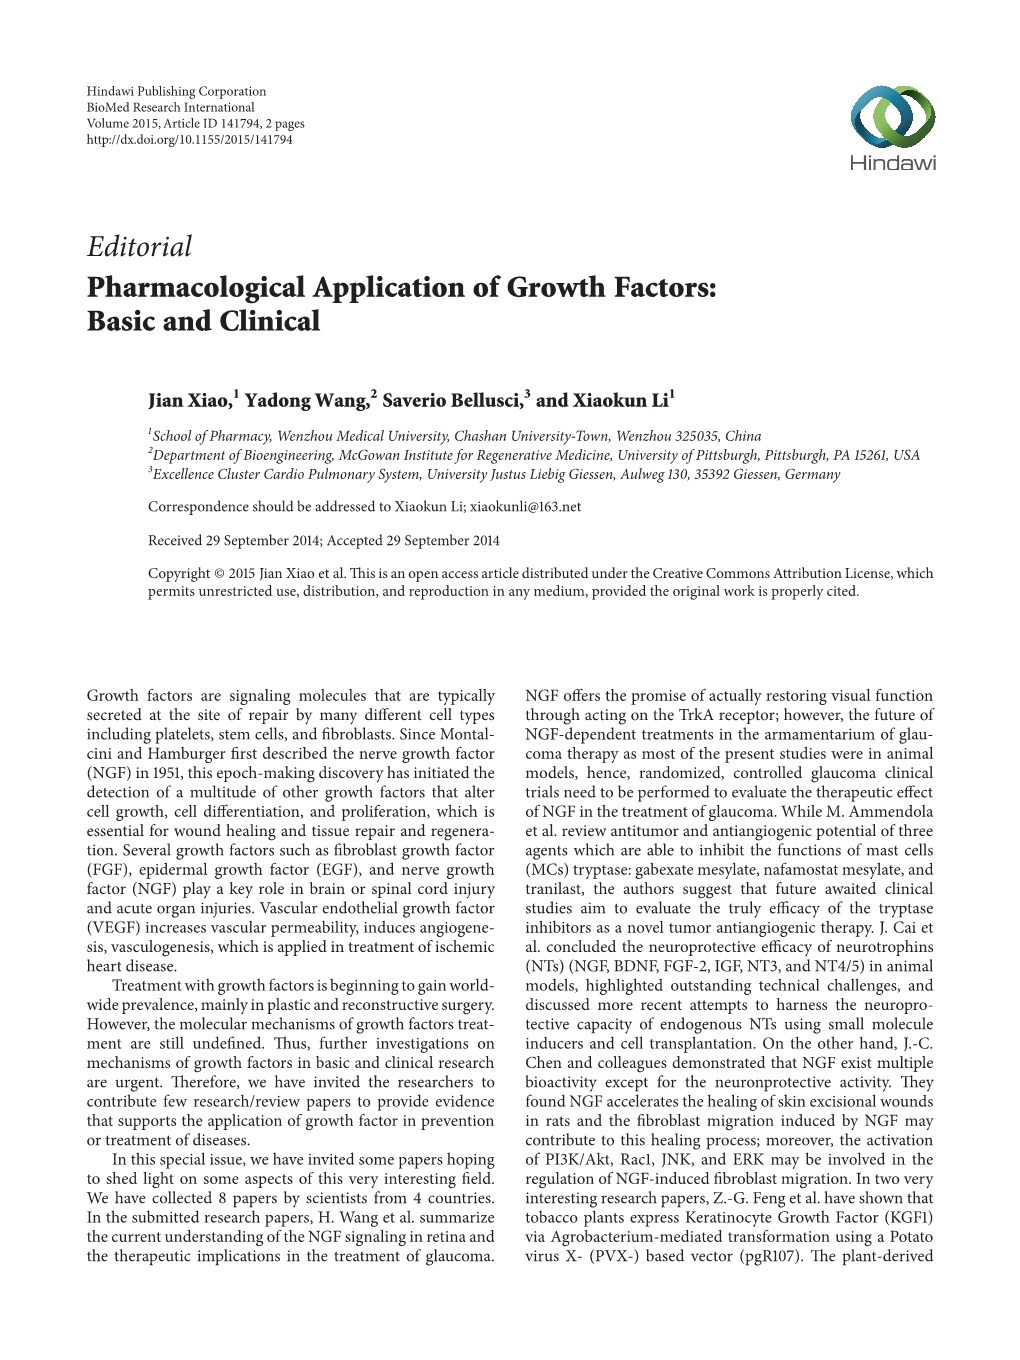 Editorial Pharmacological Application of Growth Factors: Basic and Clinical